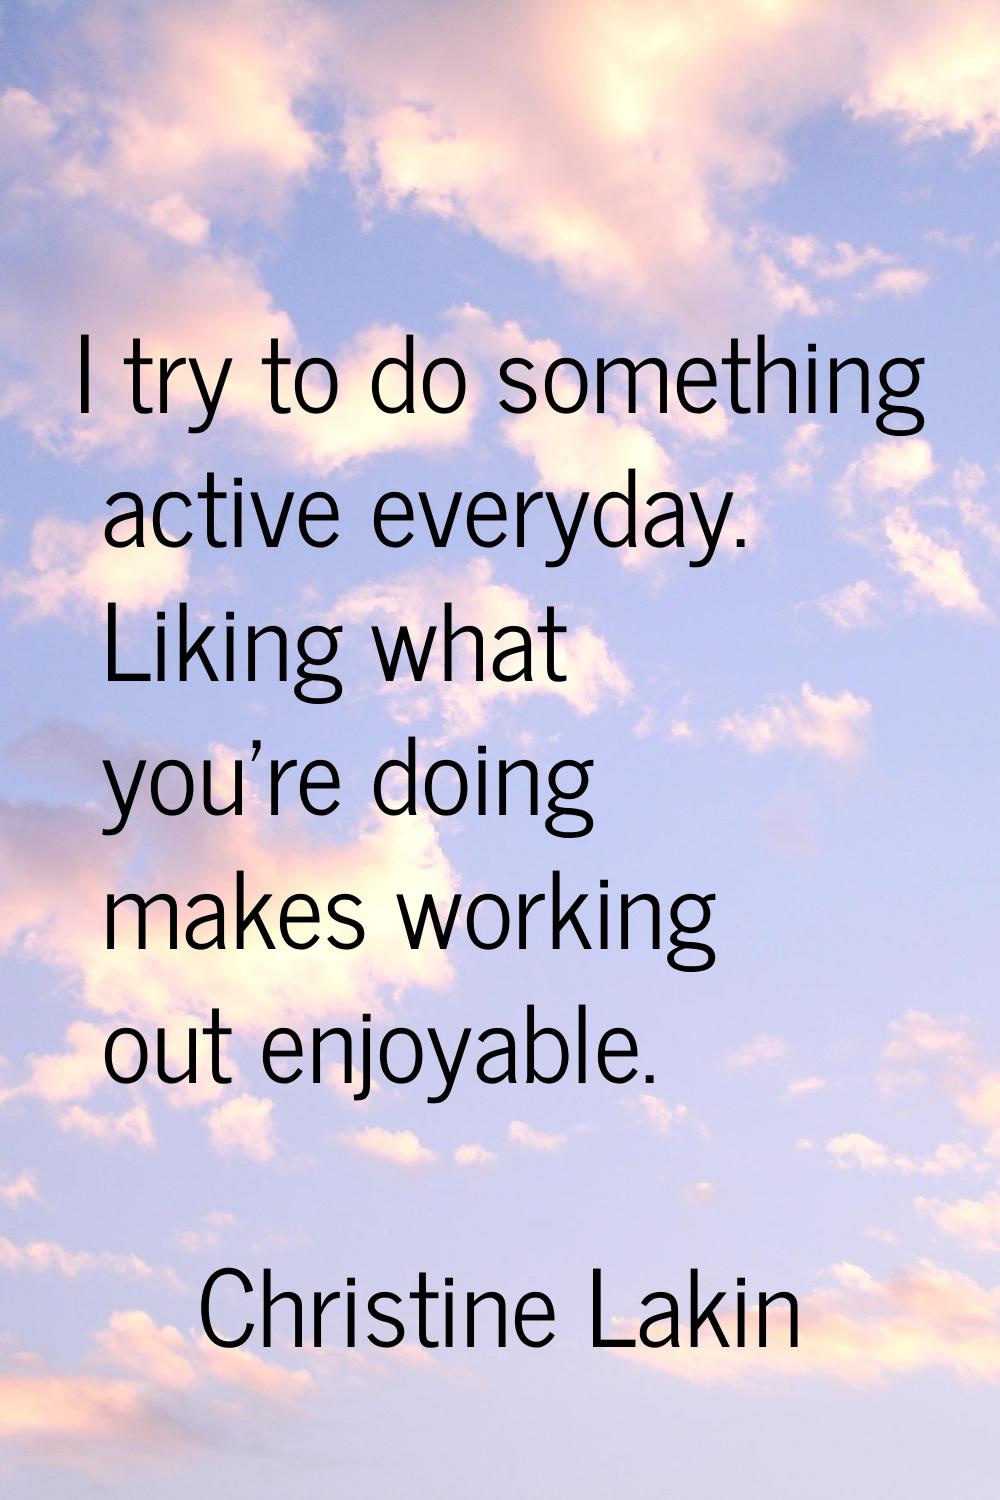 I try to do something active everyday. Liking what you're doing makes working out enjoyable.